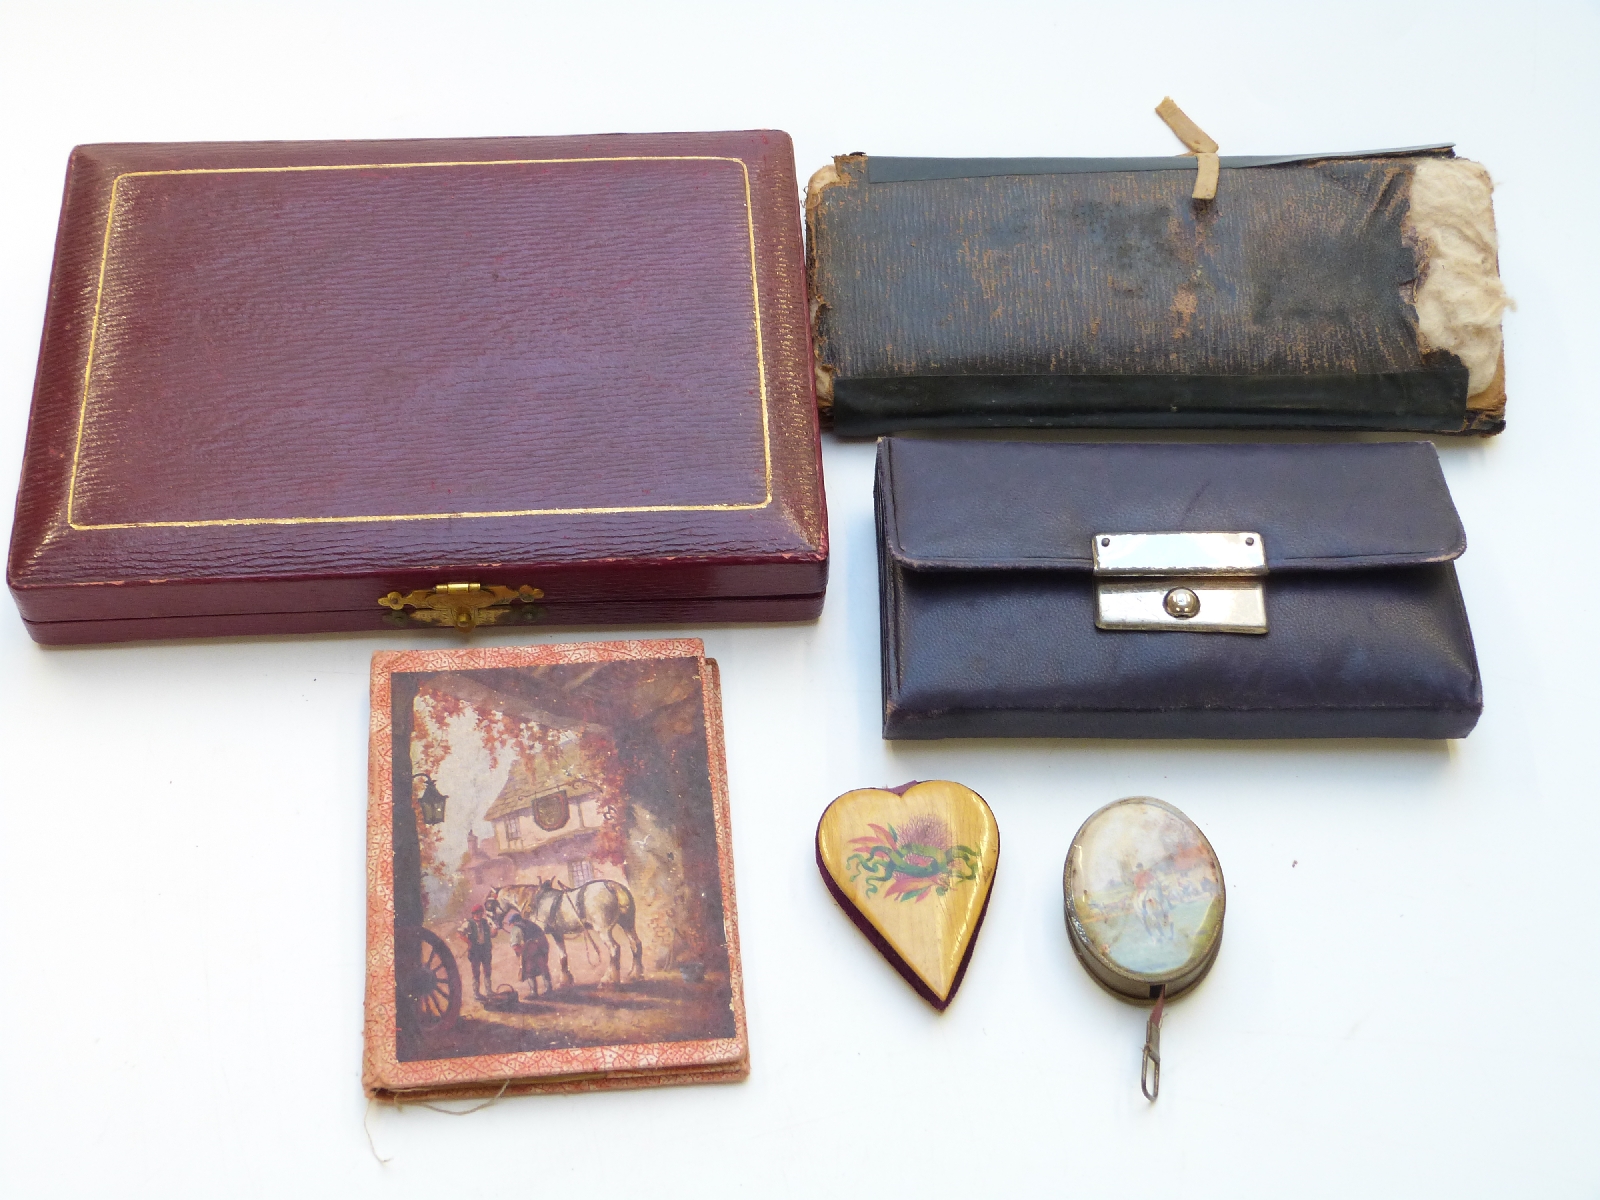 A collection of needlework / sewing items including several leather needle cases with some - Image 3 of 3